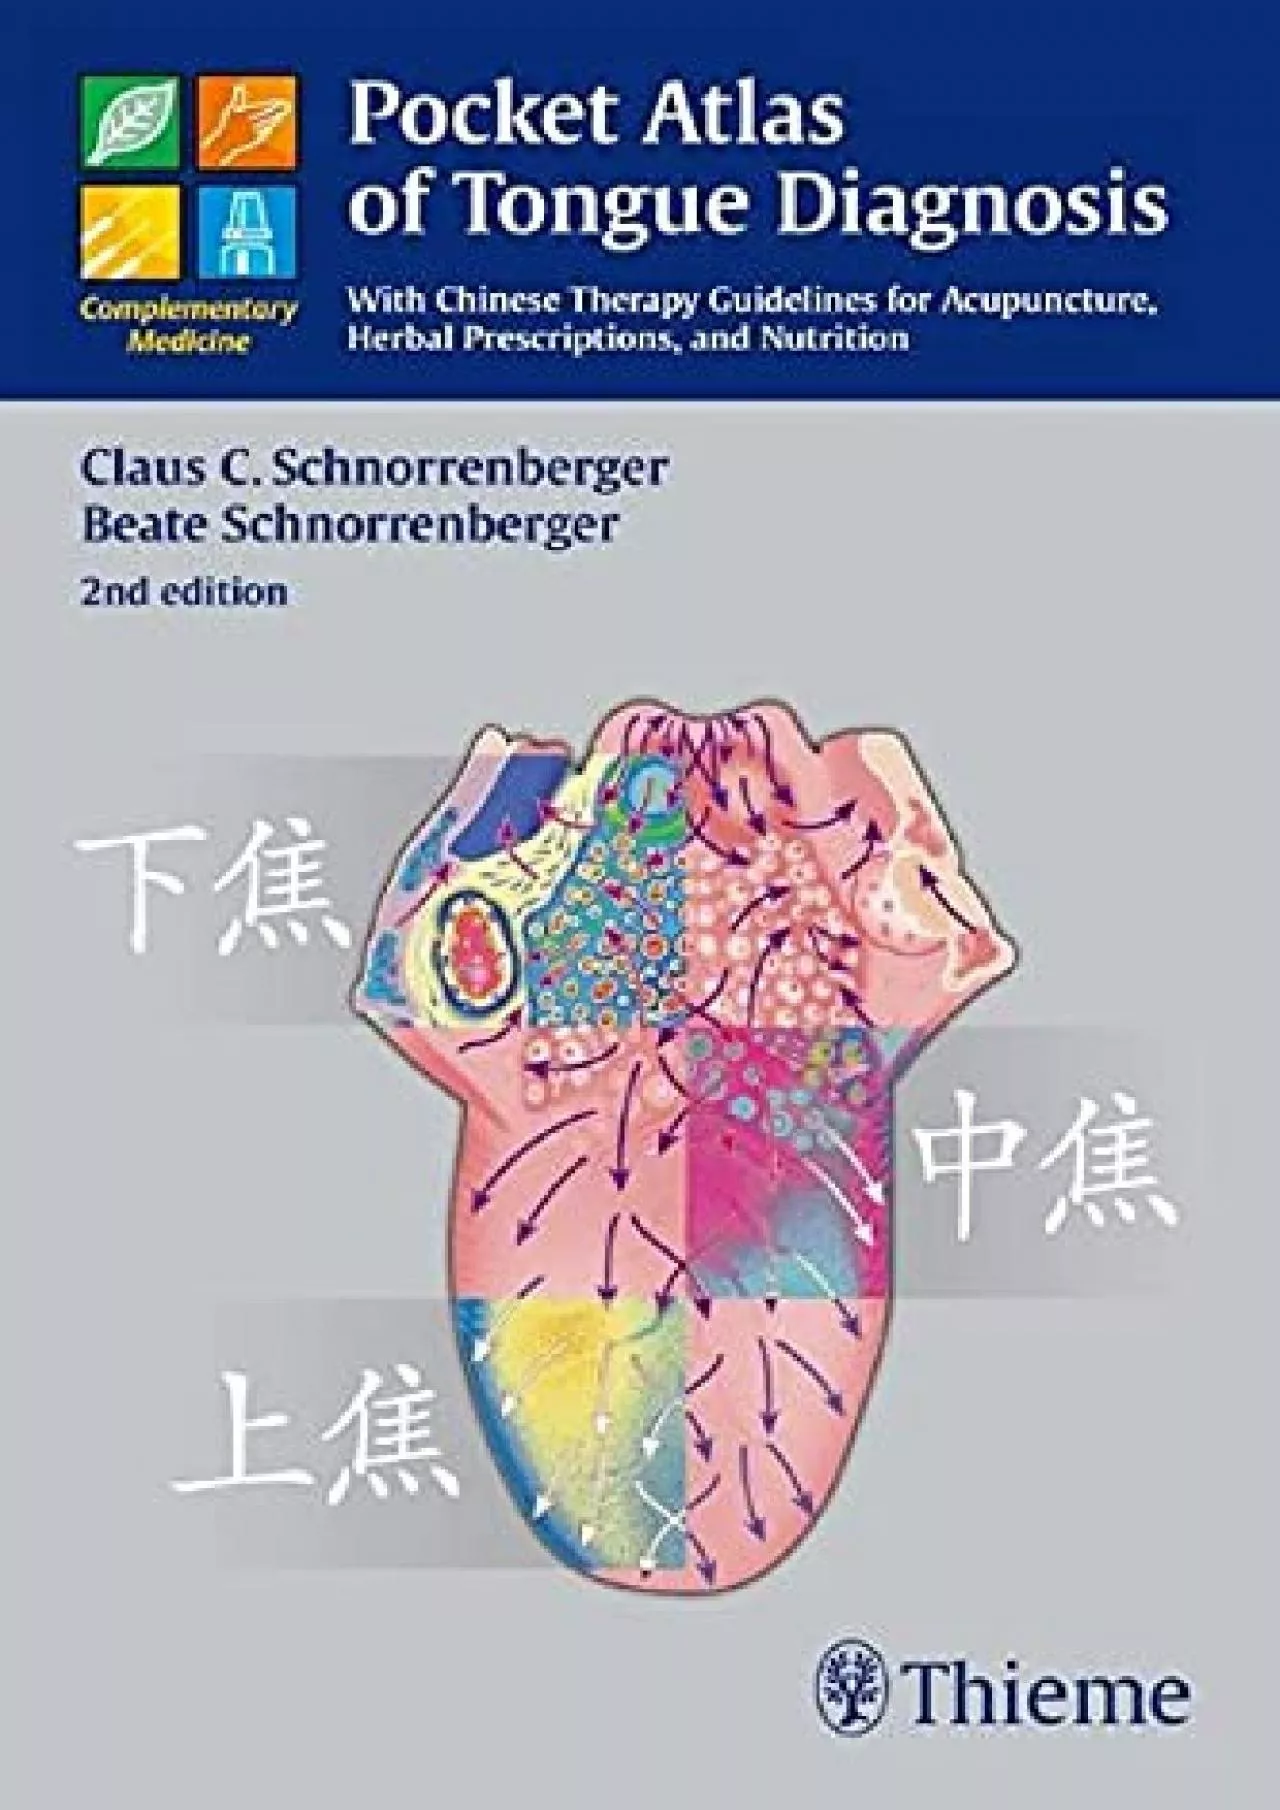 (DOWNLOAD)-Pocket Atlas of Tongue Diagnosis: With Chinese Therapy Guidelines for Acupuncture,